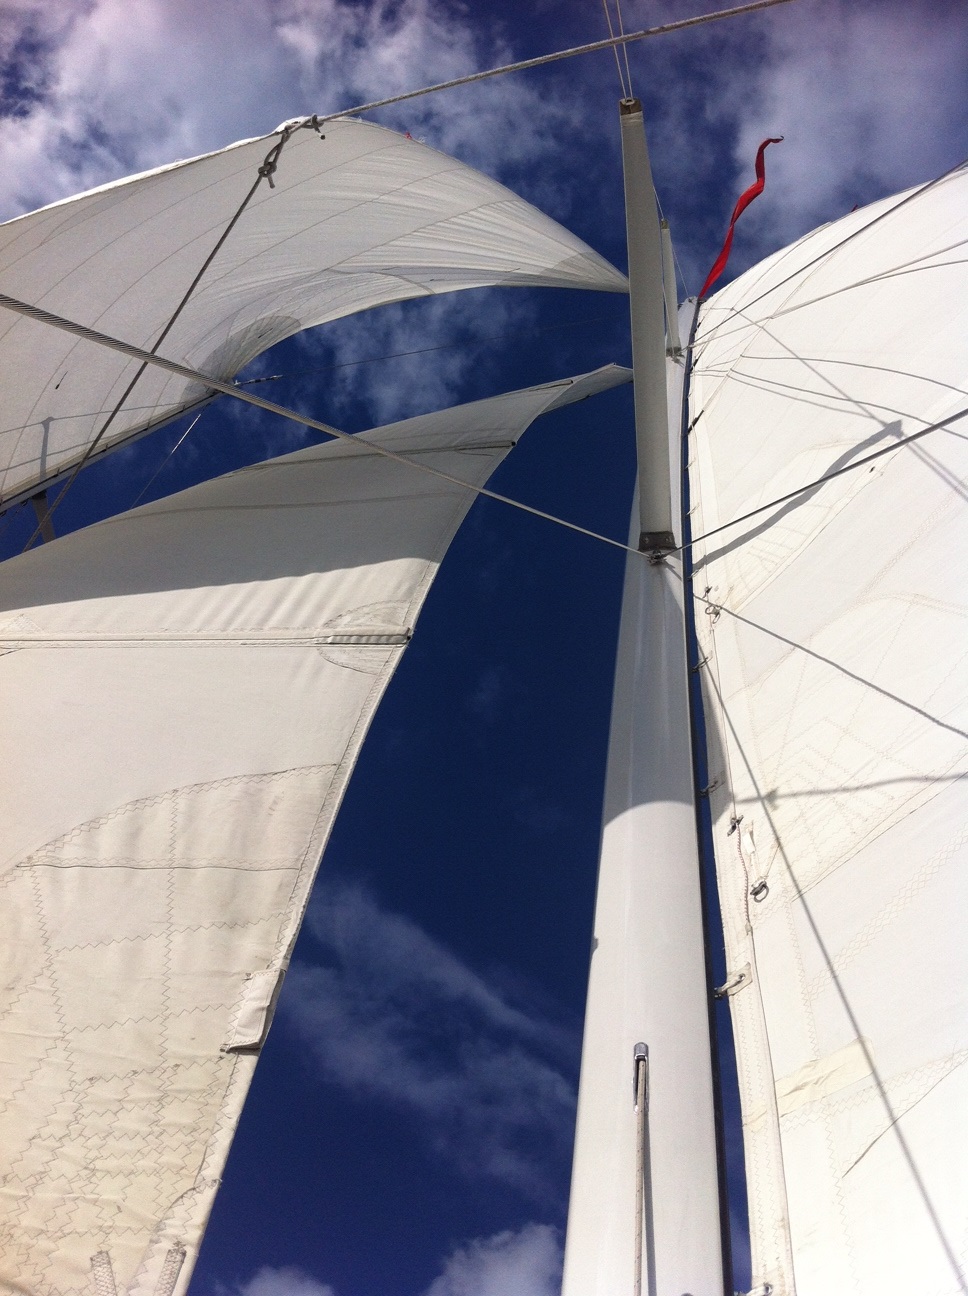 White sails against a blue sky with white clouds